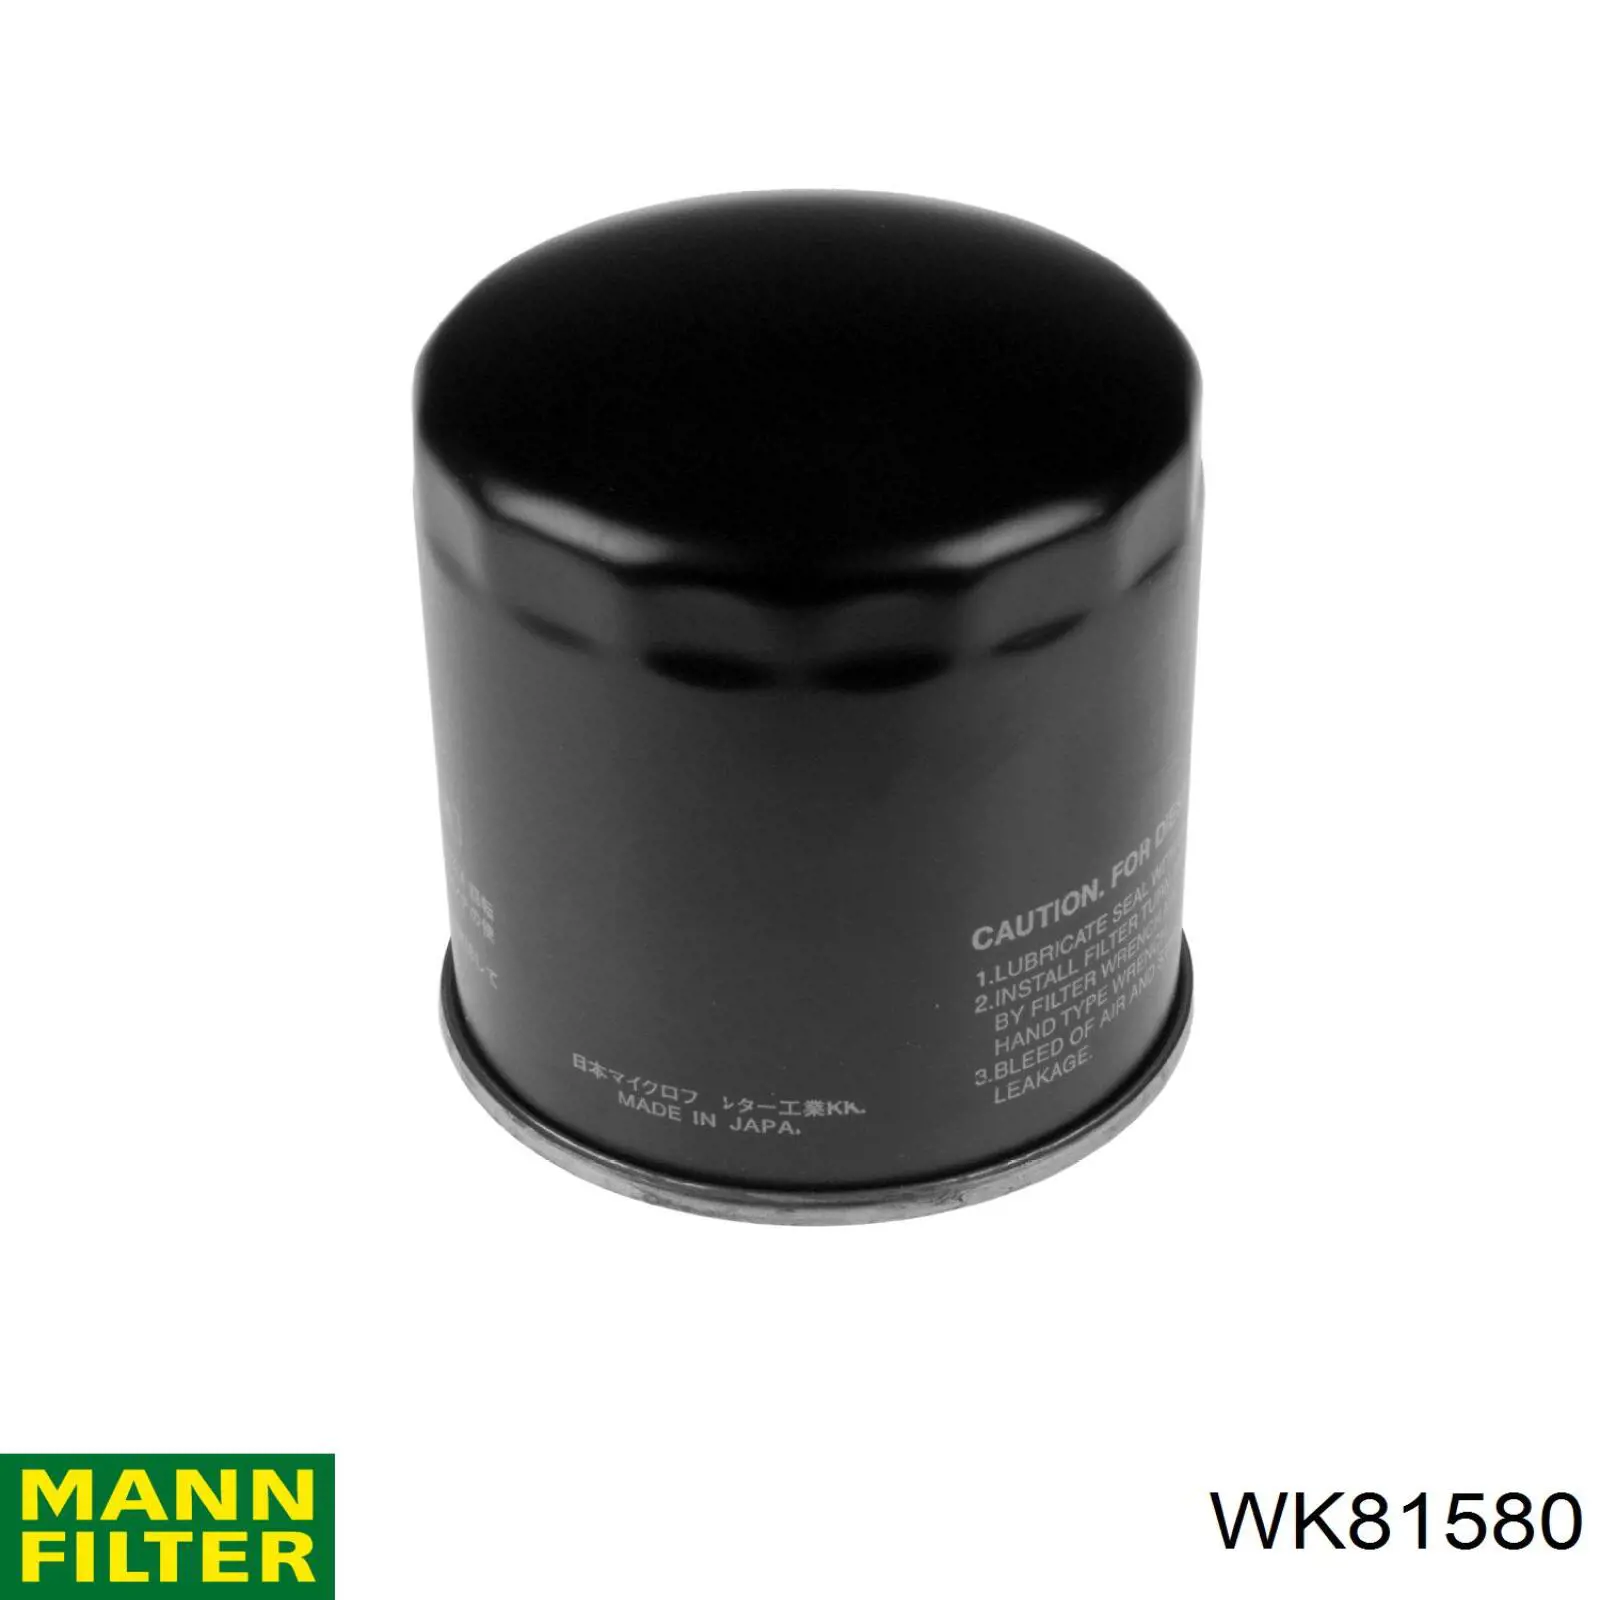 WK81580 Mann-Filter filtro combustible